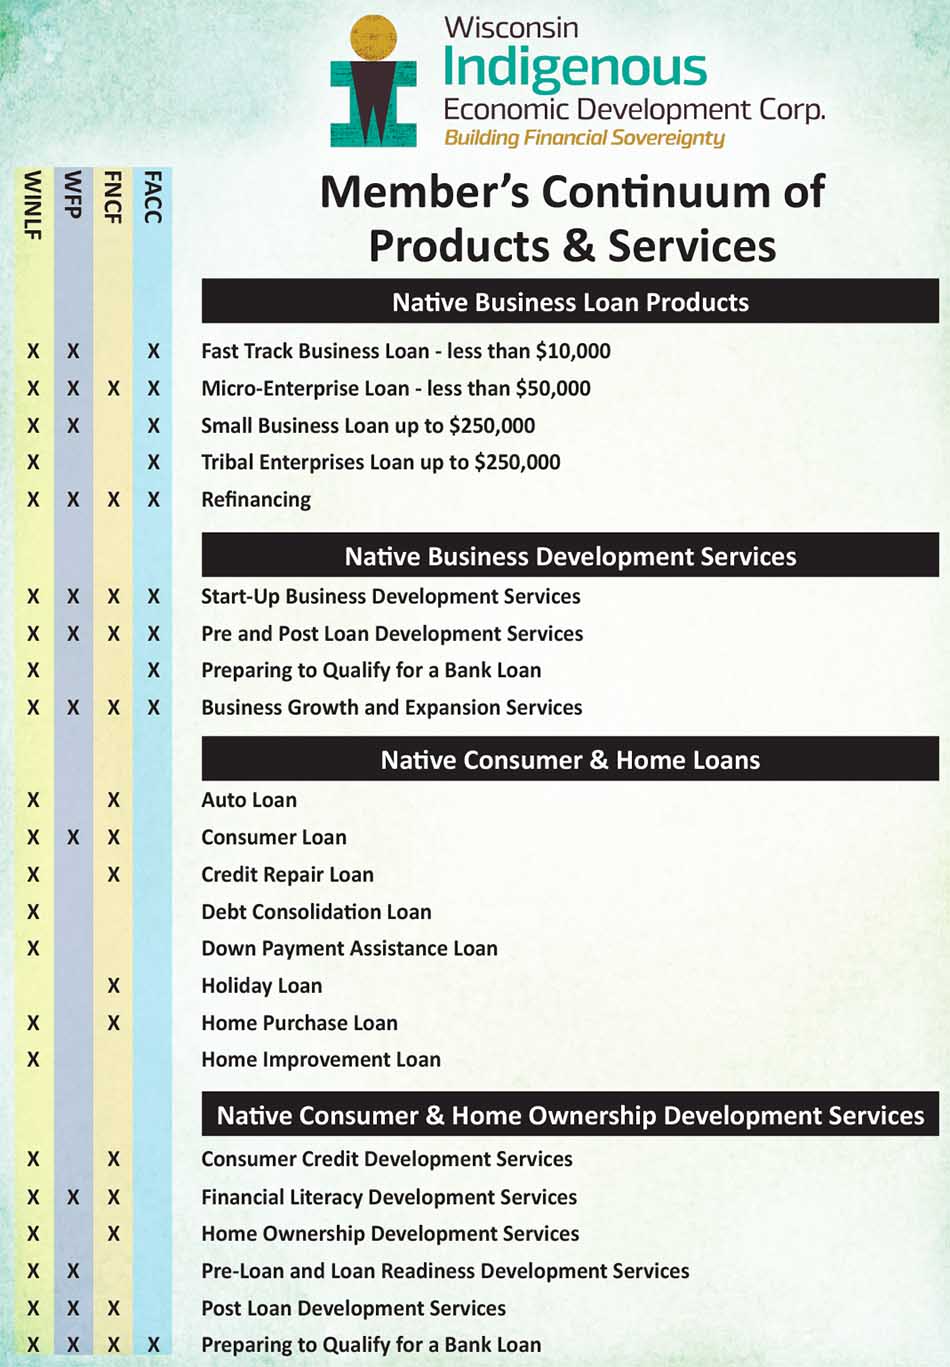 Continuum of Member Products Services 2023